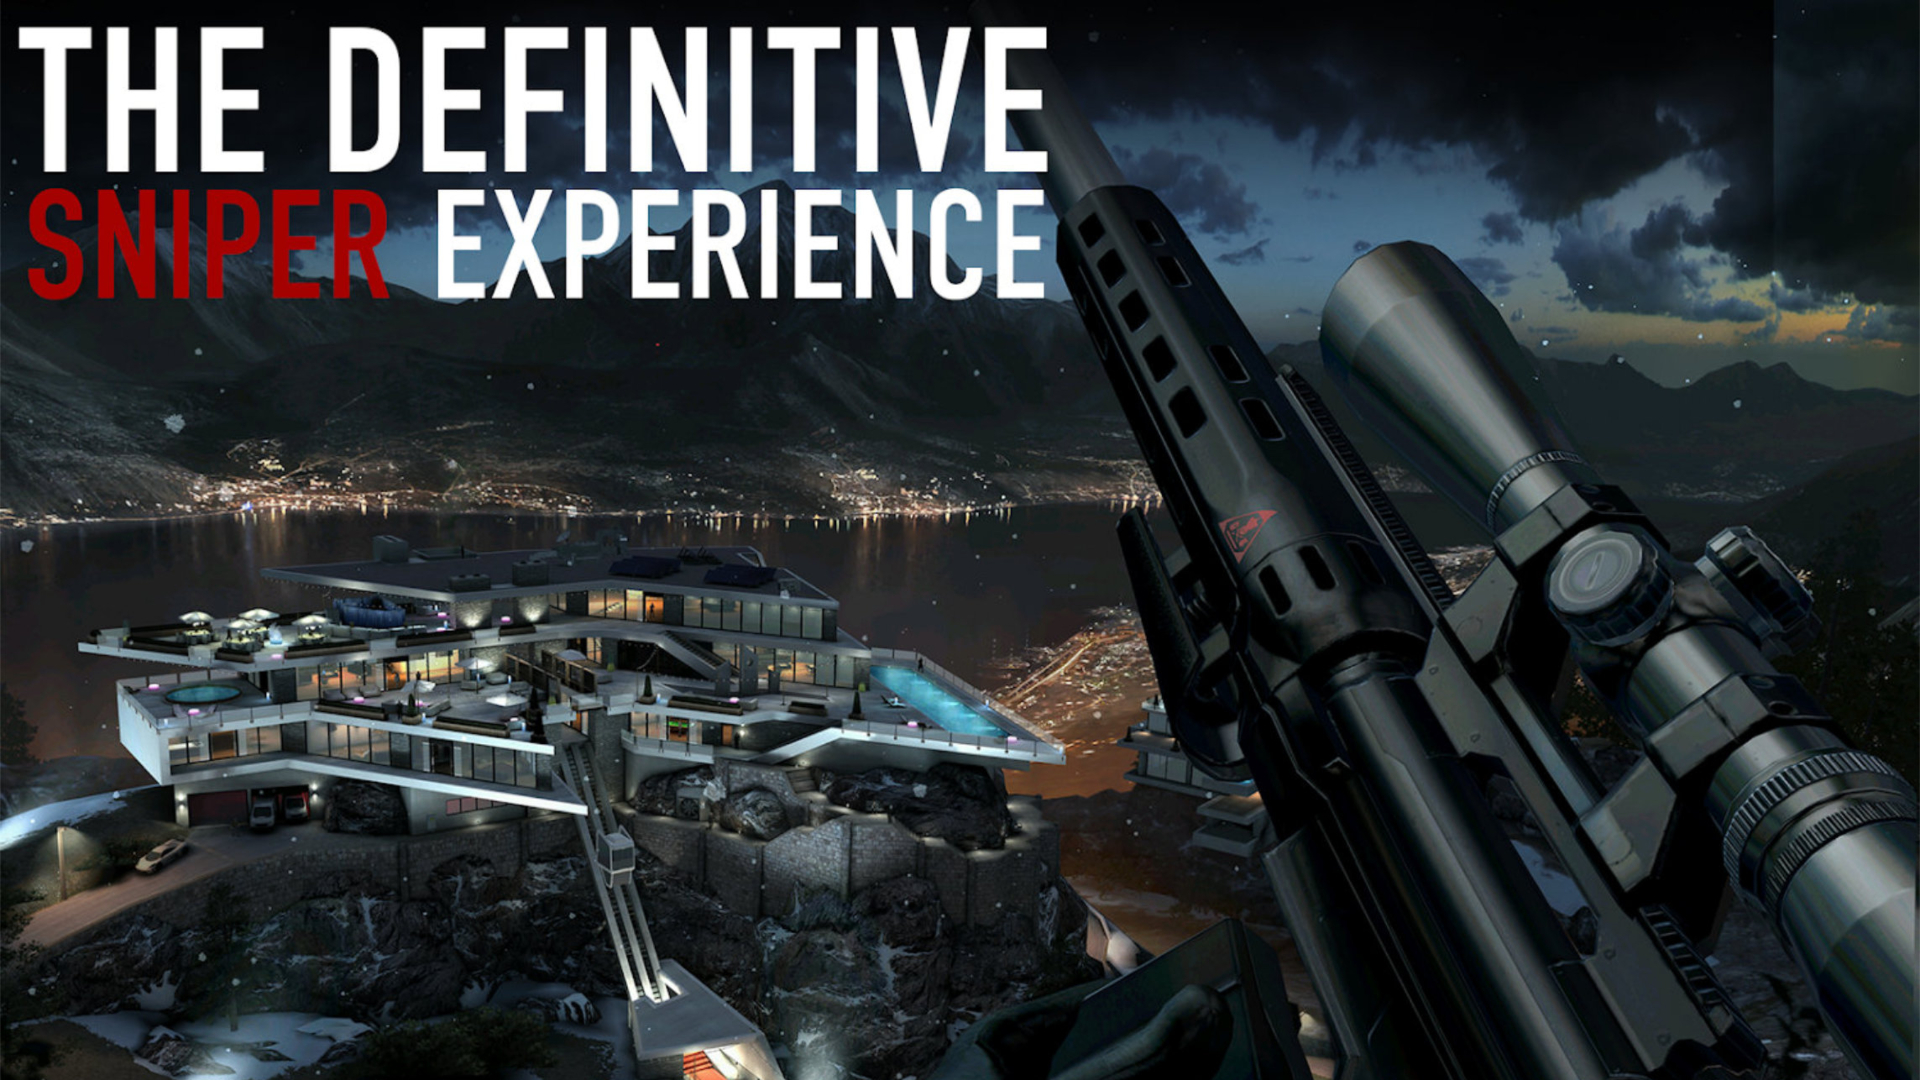 Best mobile shooters: Hitman Sniper. Image shows a sniper rifle with buildings in the distance. Text reads "The definitive sniper experience."